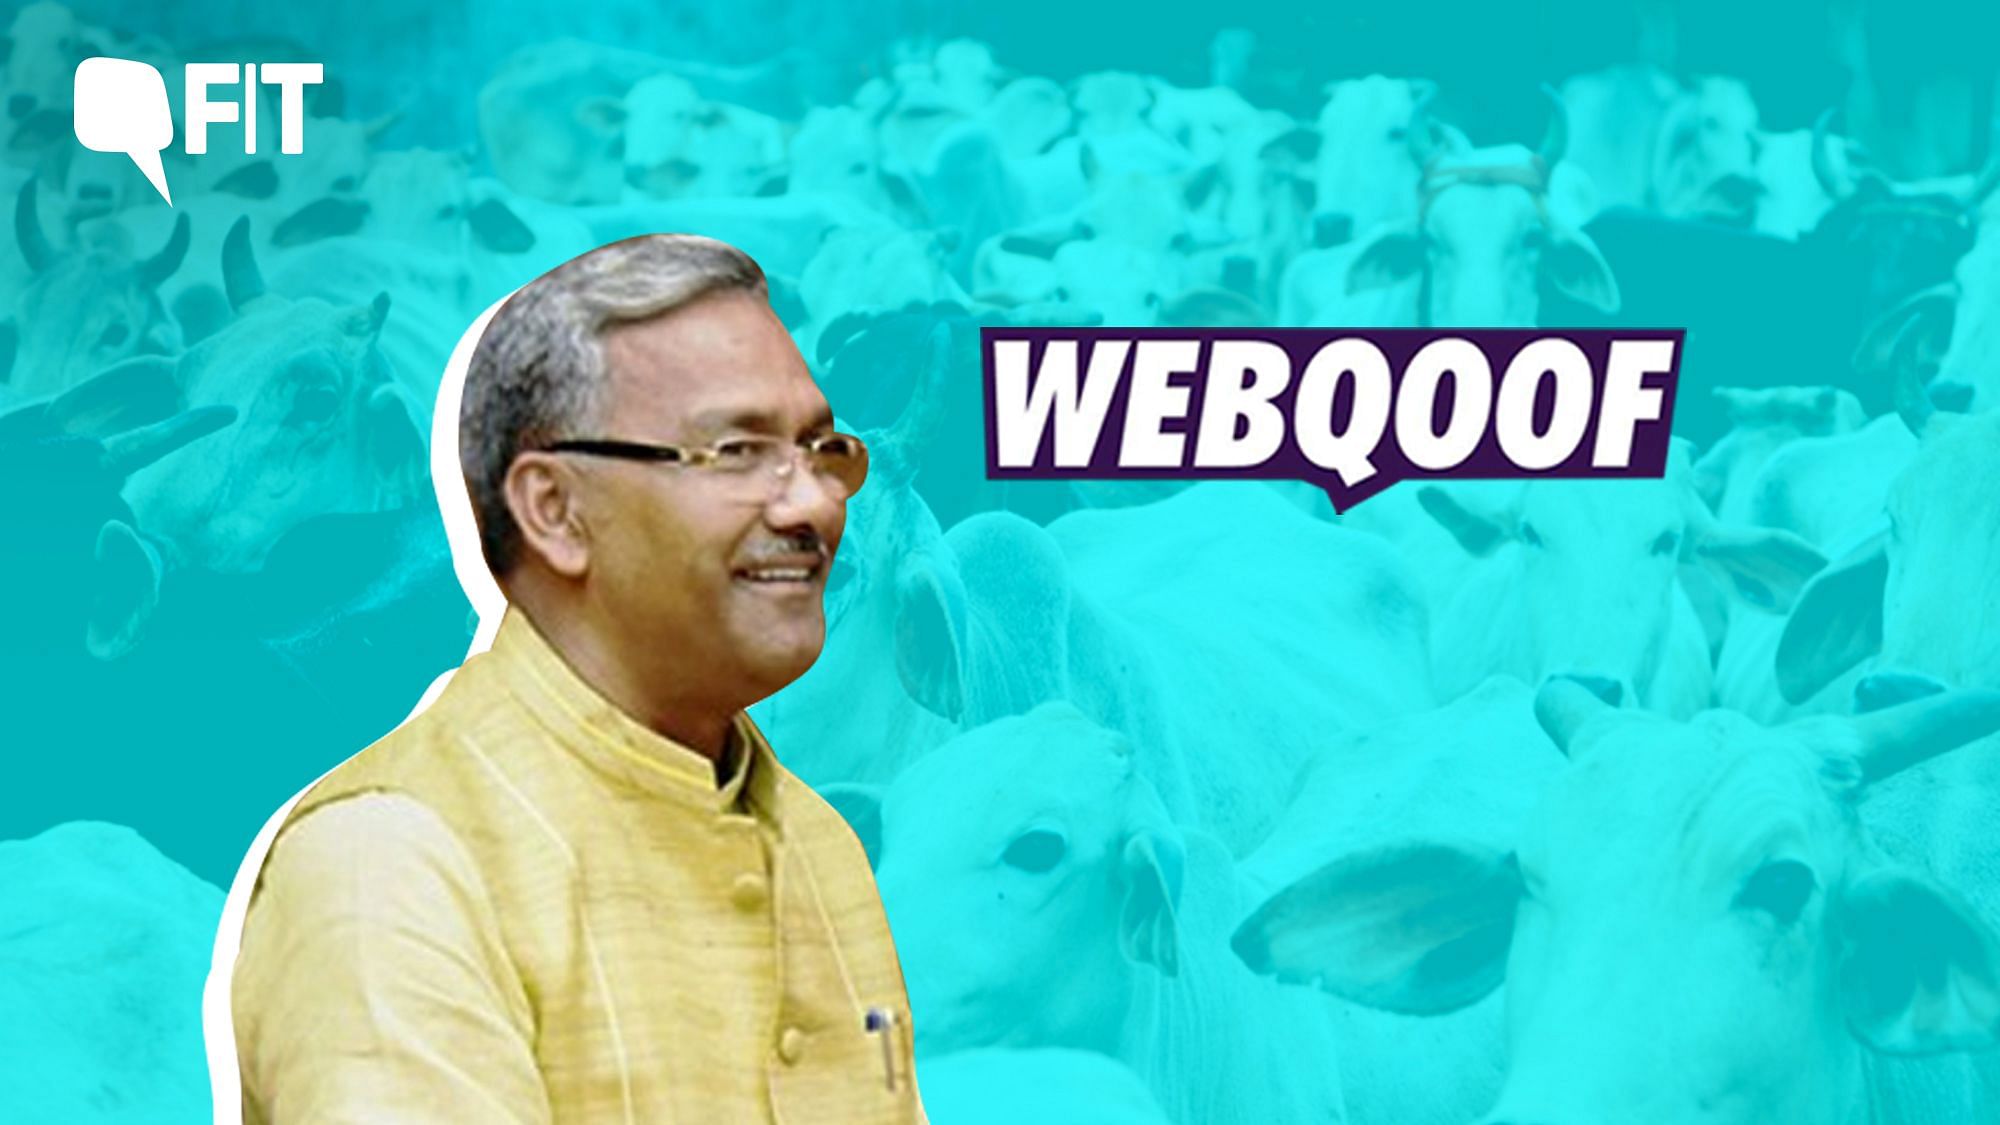 Uttarakhand Chief Minister, Trivendra Singh Rawat, also claimed that cows exhale oxygen.